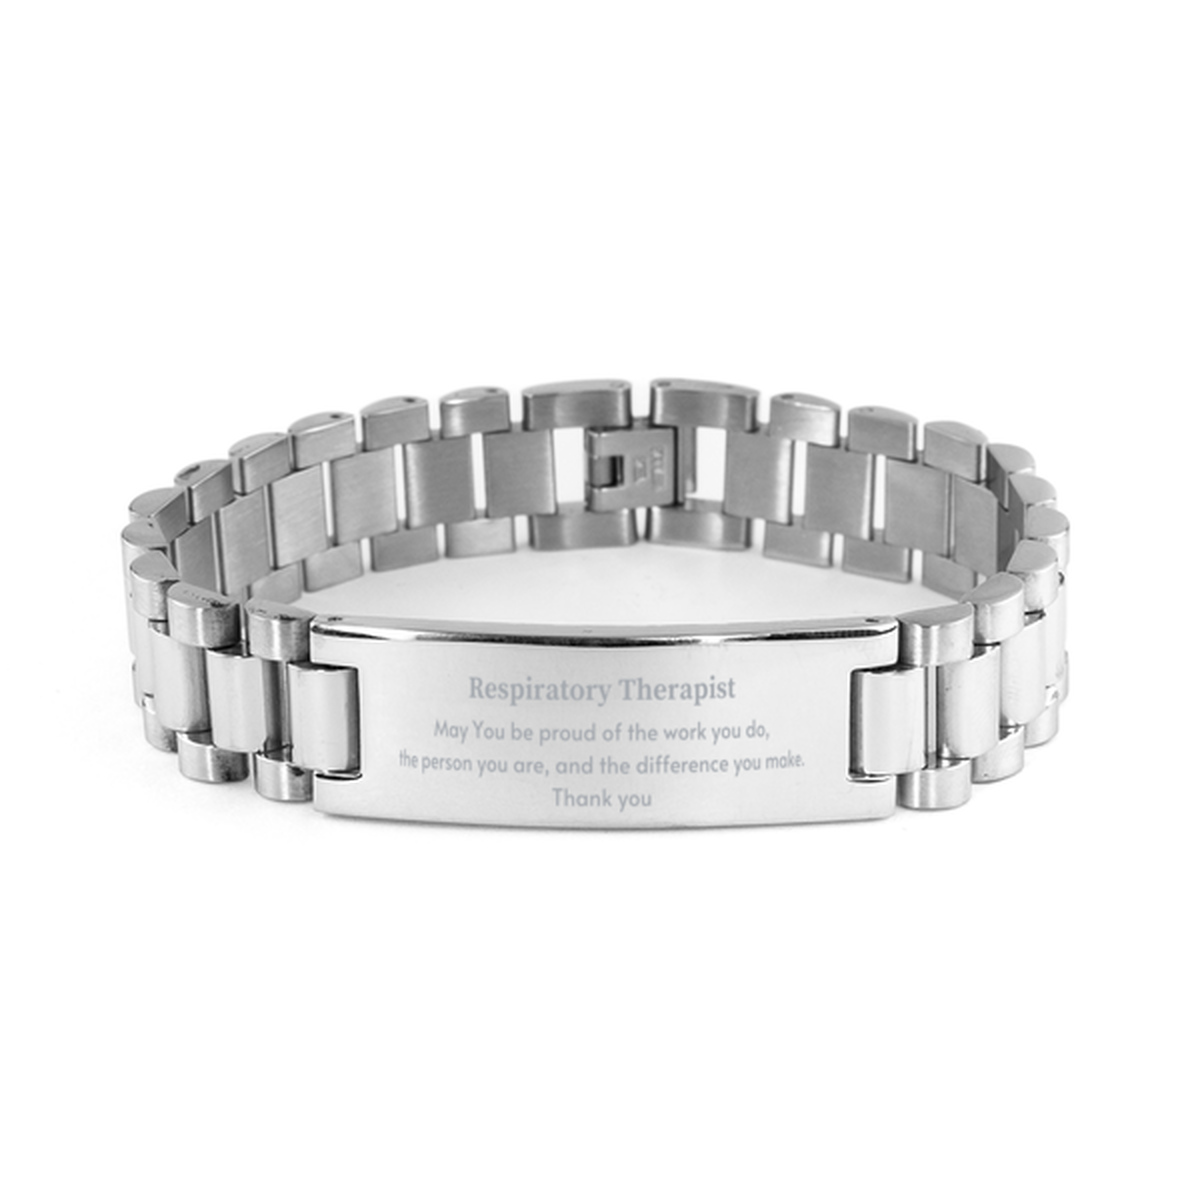 Heartwarming Ladder Stainless Steel Bracelet Retirement Coworkers Gifts for Respiratory Therapist, Respiratory Therapist May You be proud of the work you do, the person you are Gifts for Boss Men Women Friends